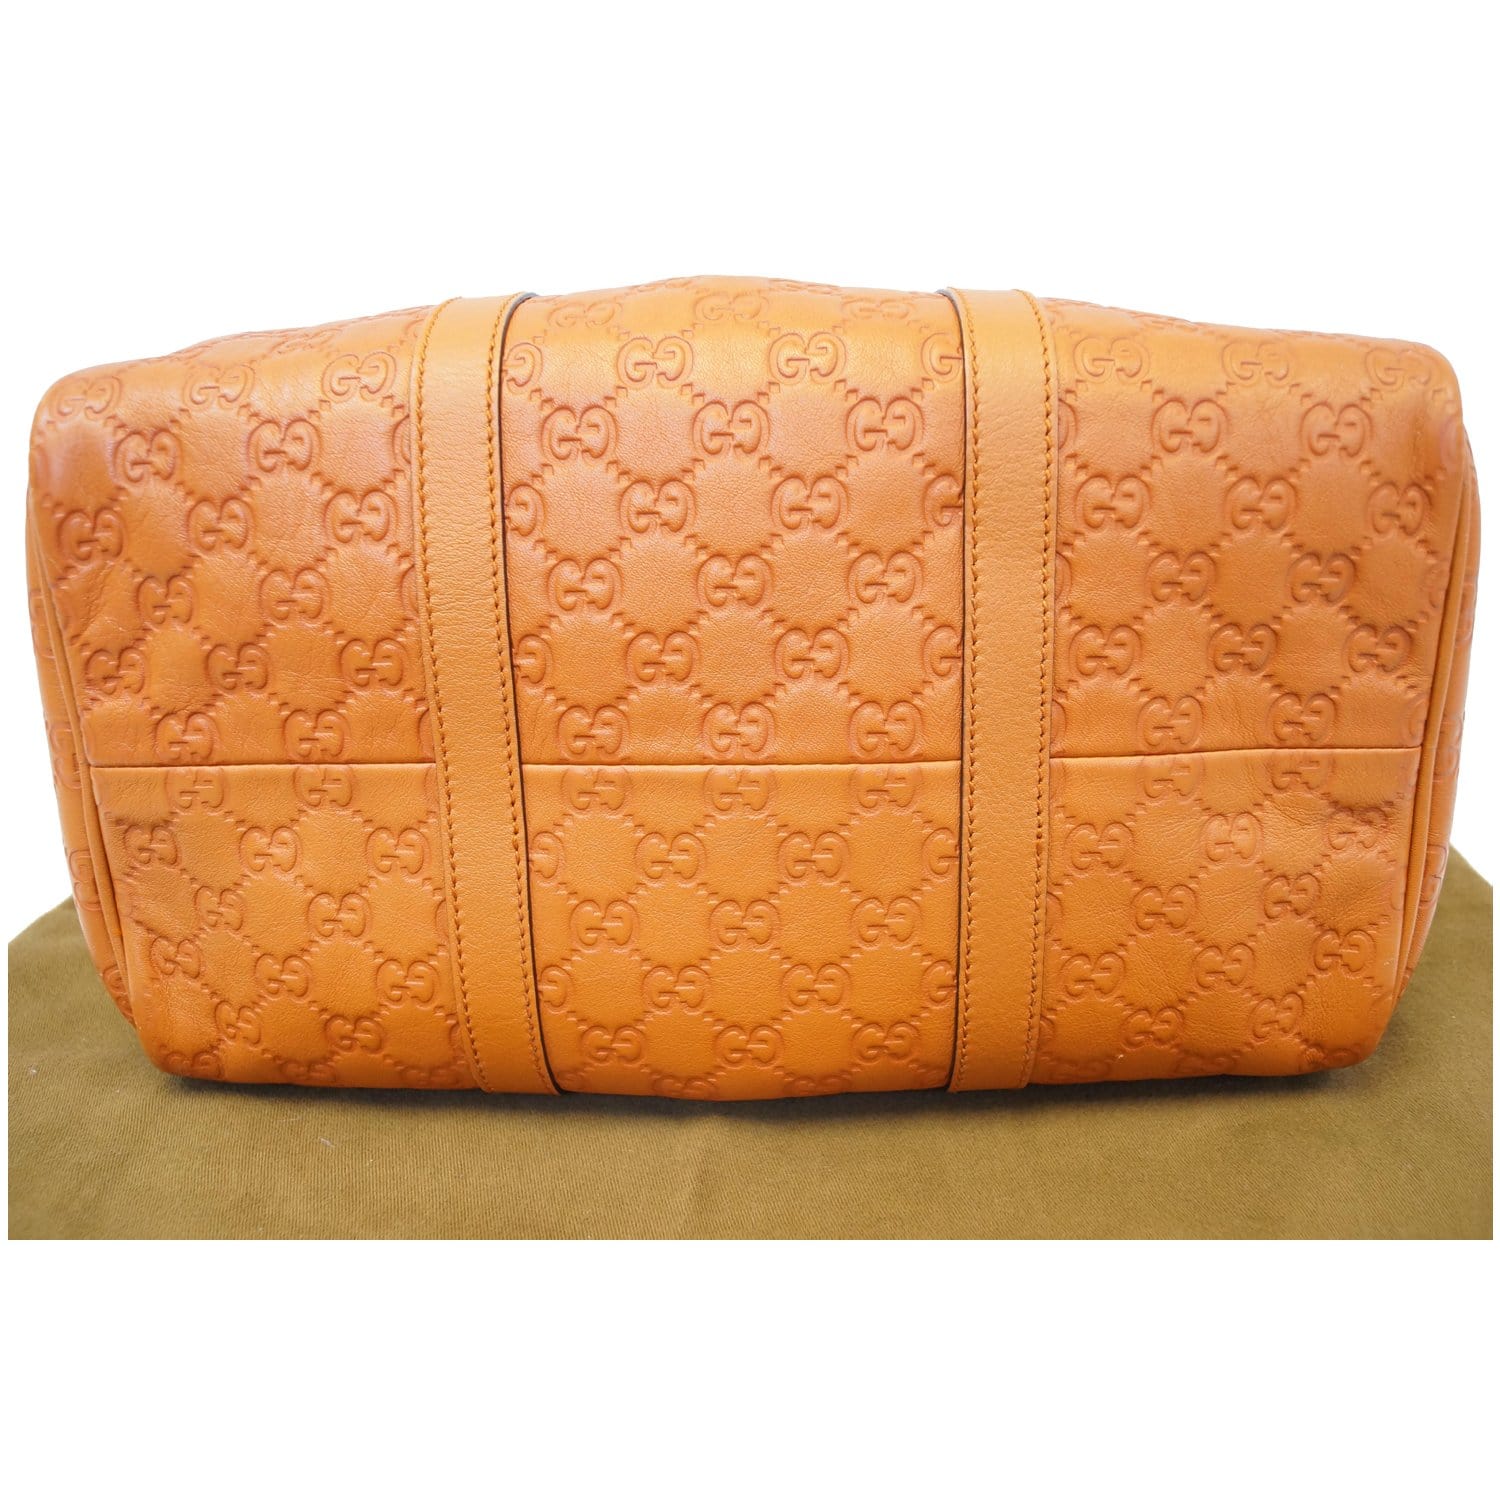 GUCCI GG Guccissima Cosmetic Pouch Makeup Bag Orange Brown Leather